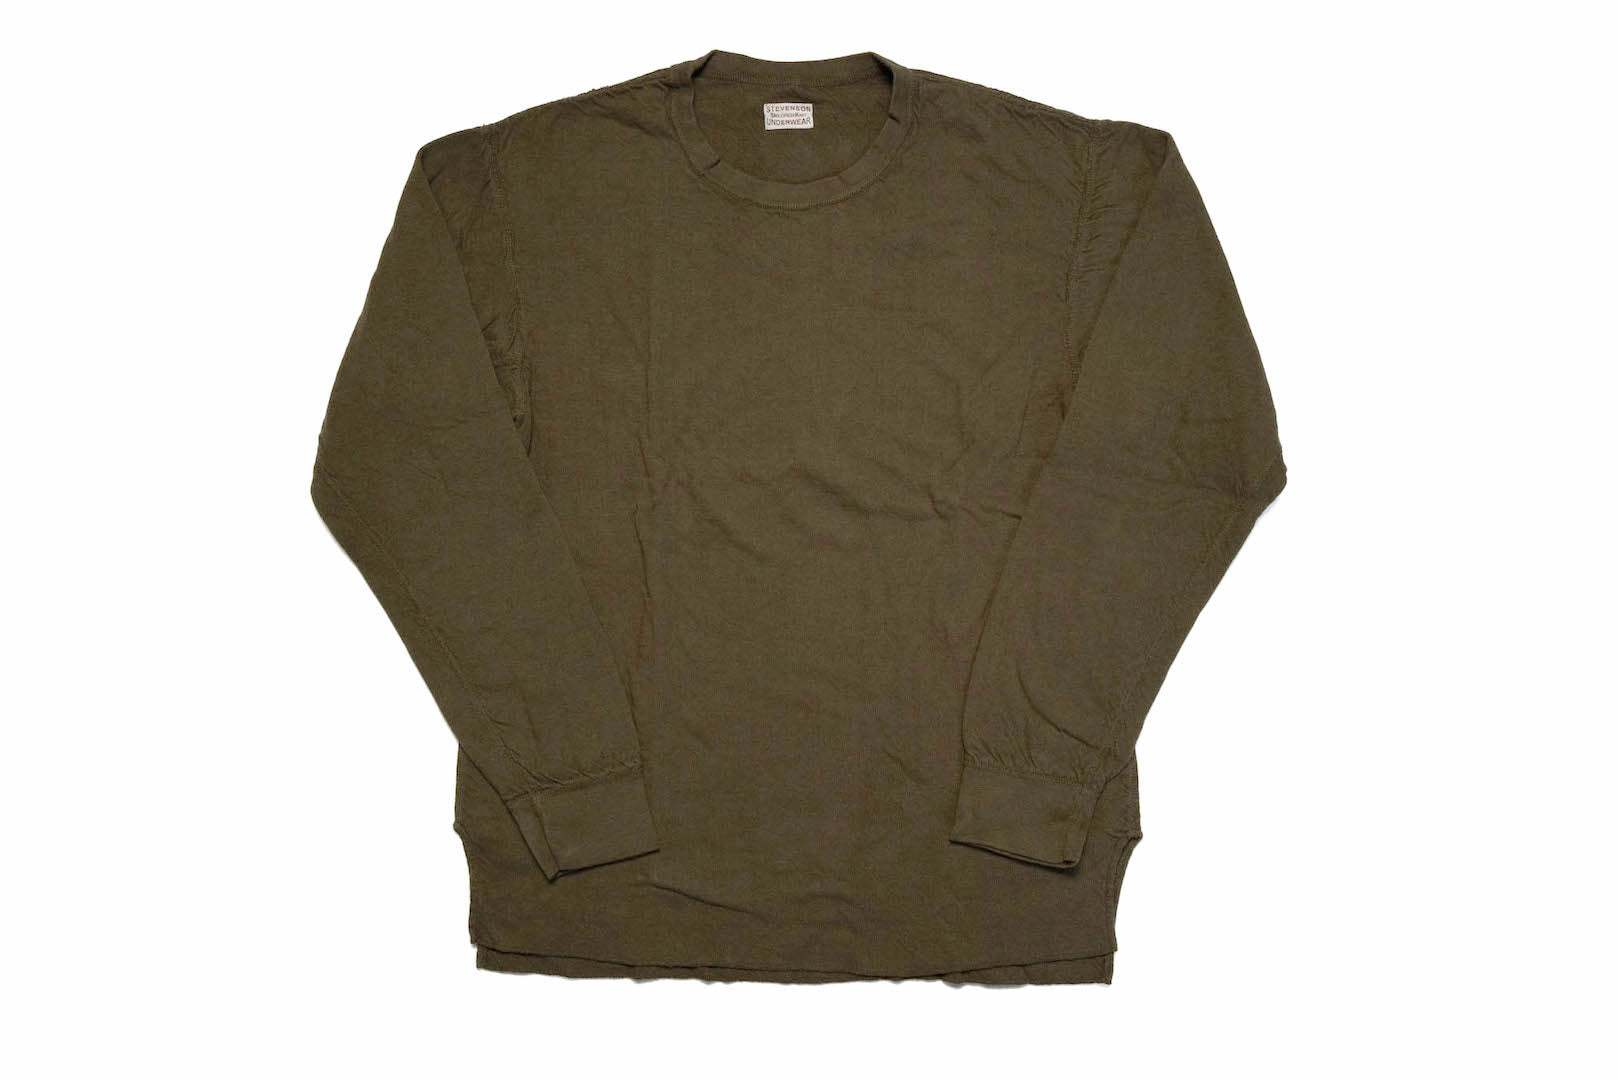 Stevenson Overall Co. Double Layered L/S Loopwheeled Thermal (Olive)